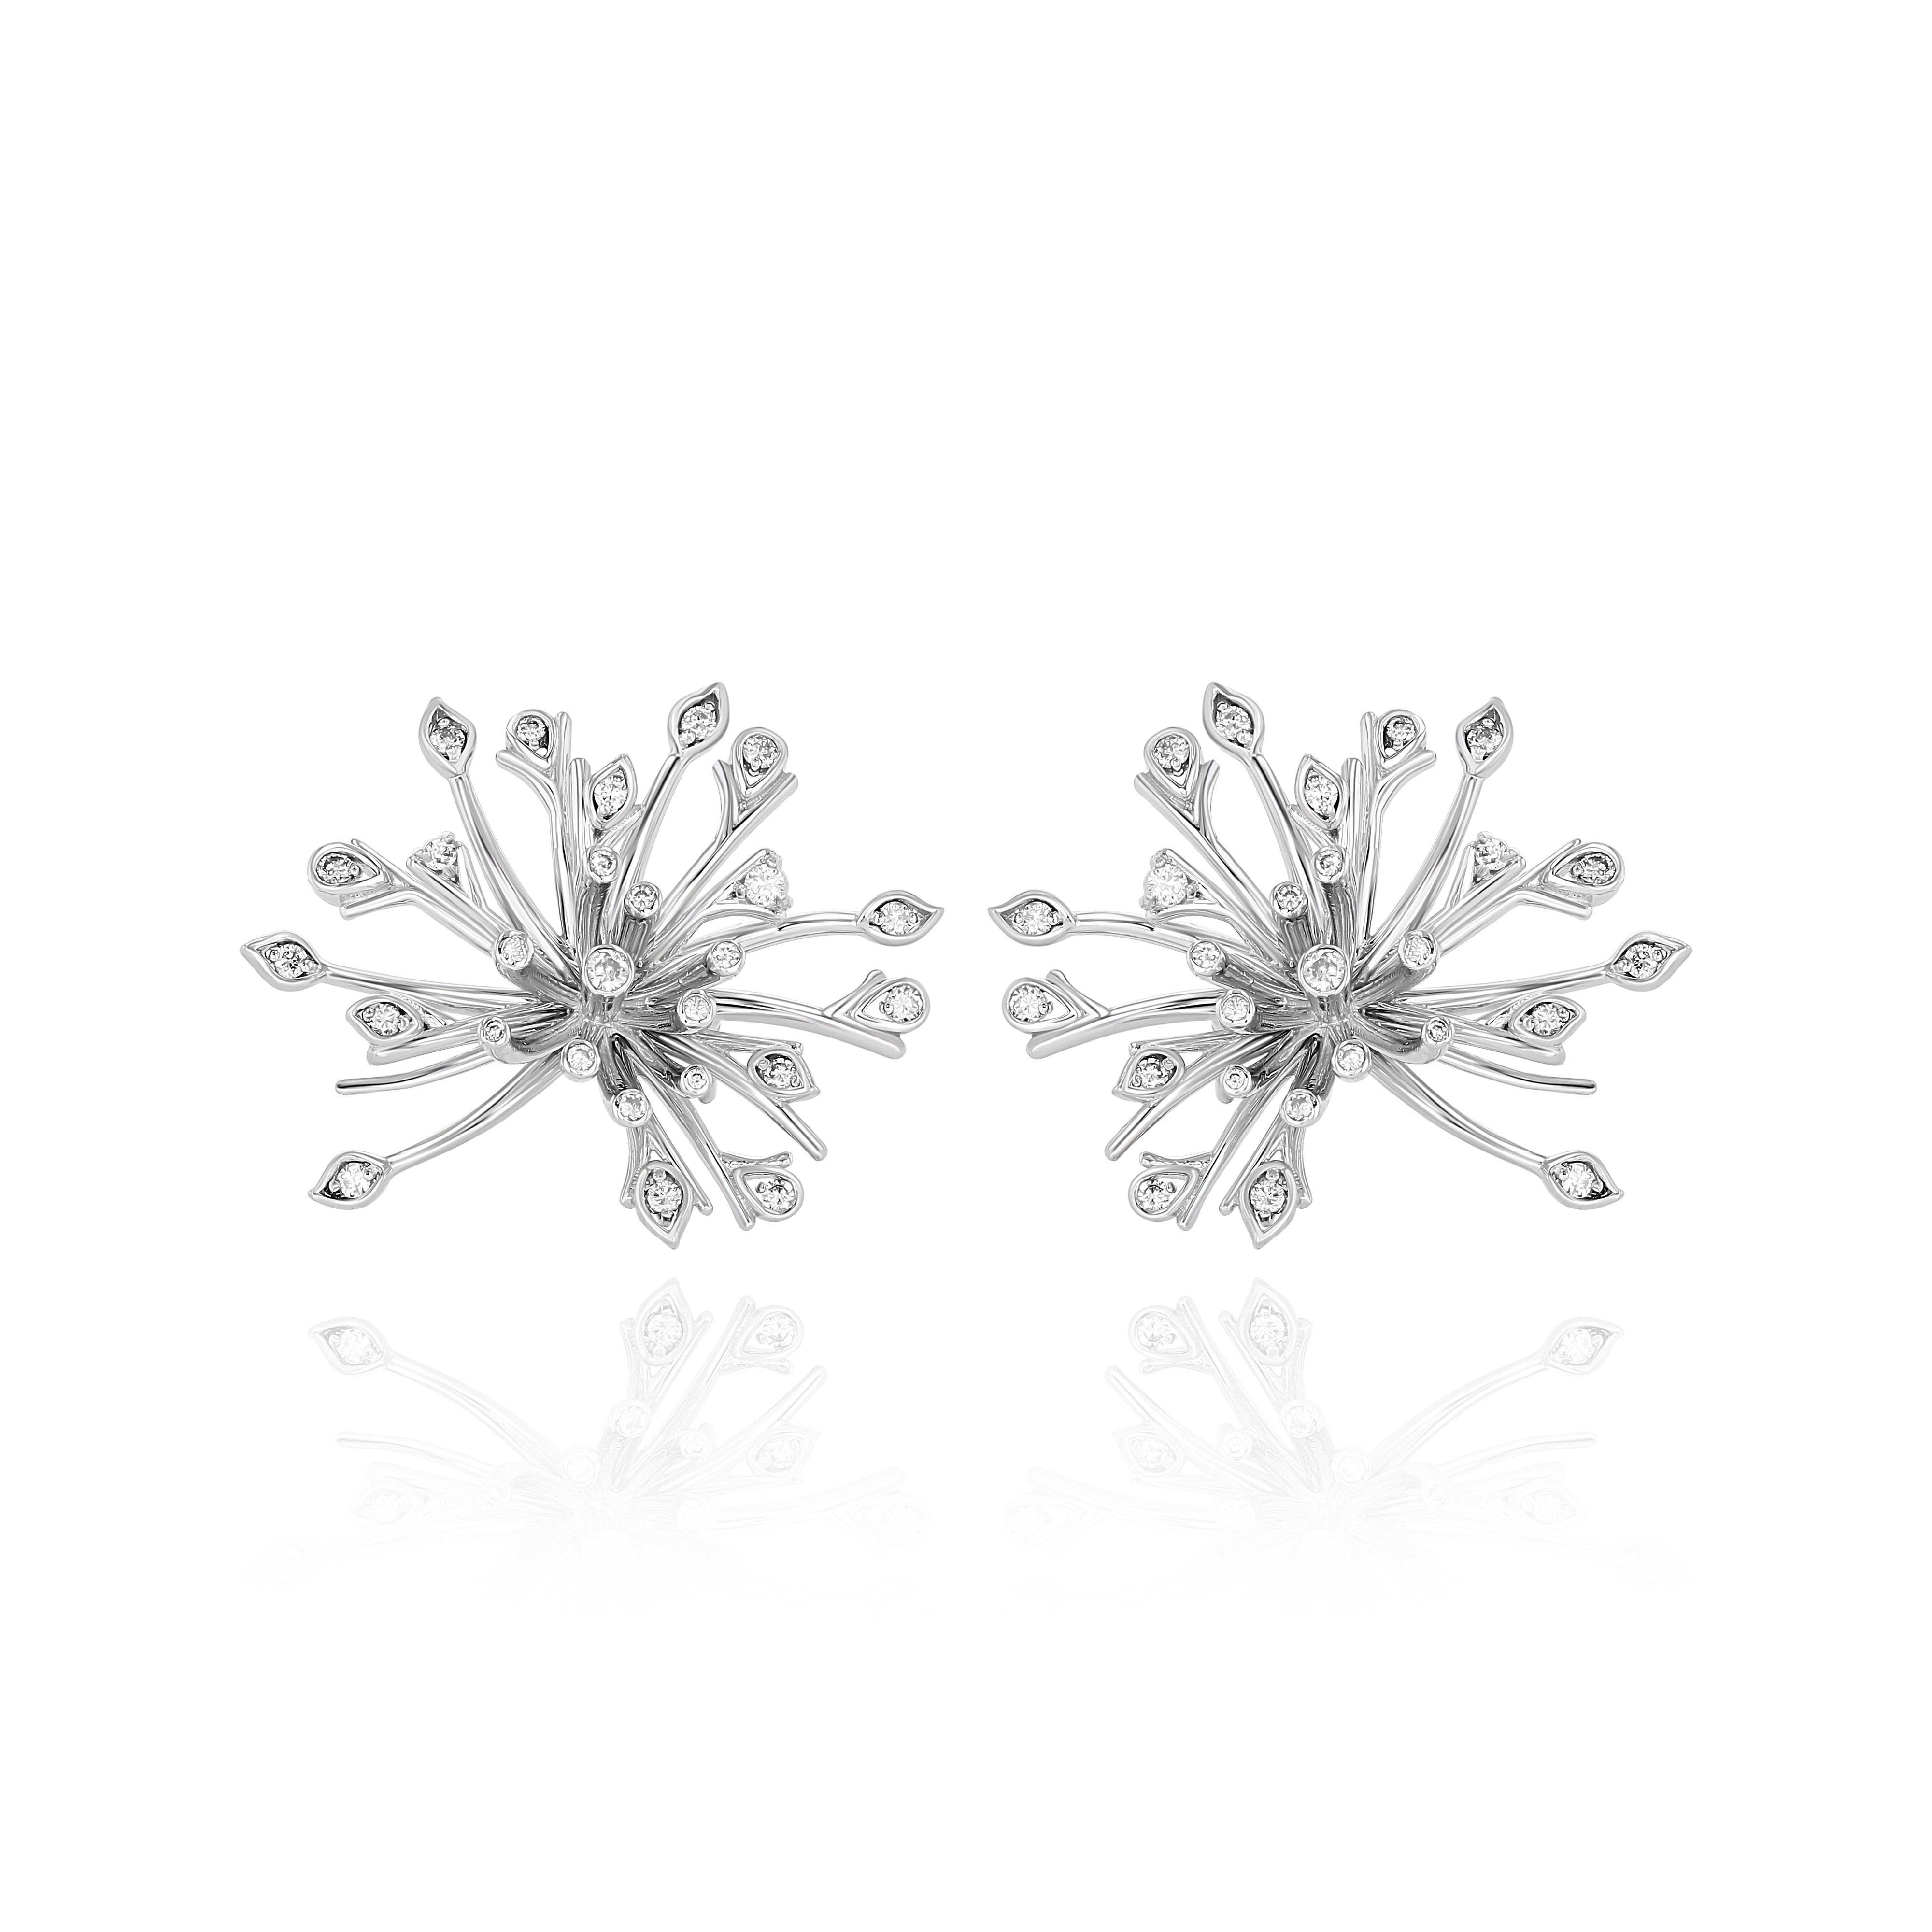 White Gold Earrings, resembling a dandelion flower, with small round Diamonds, Large